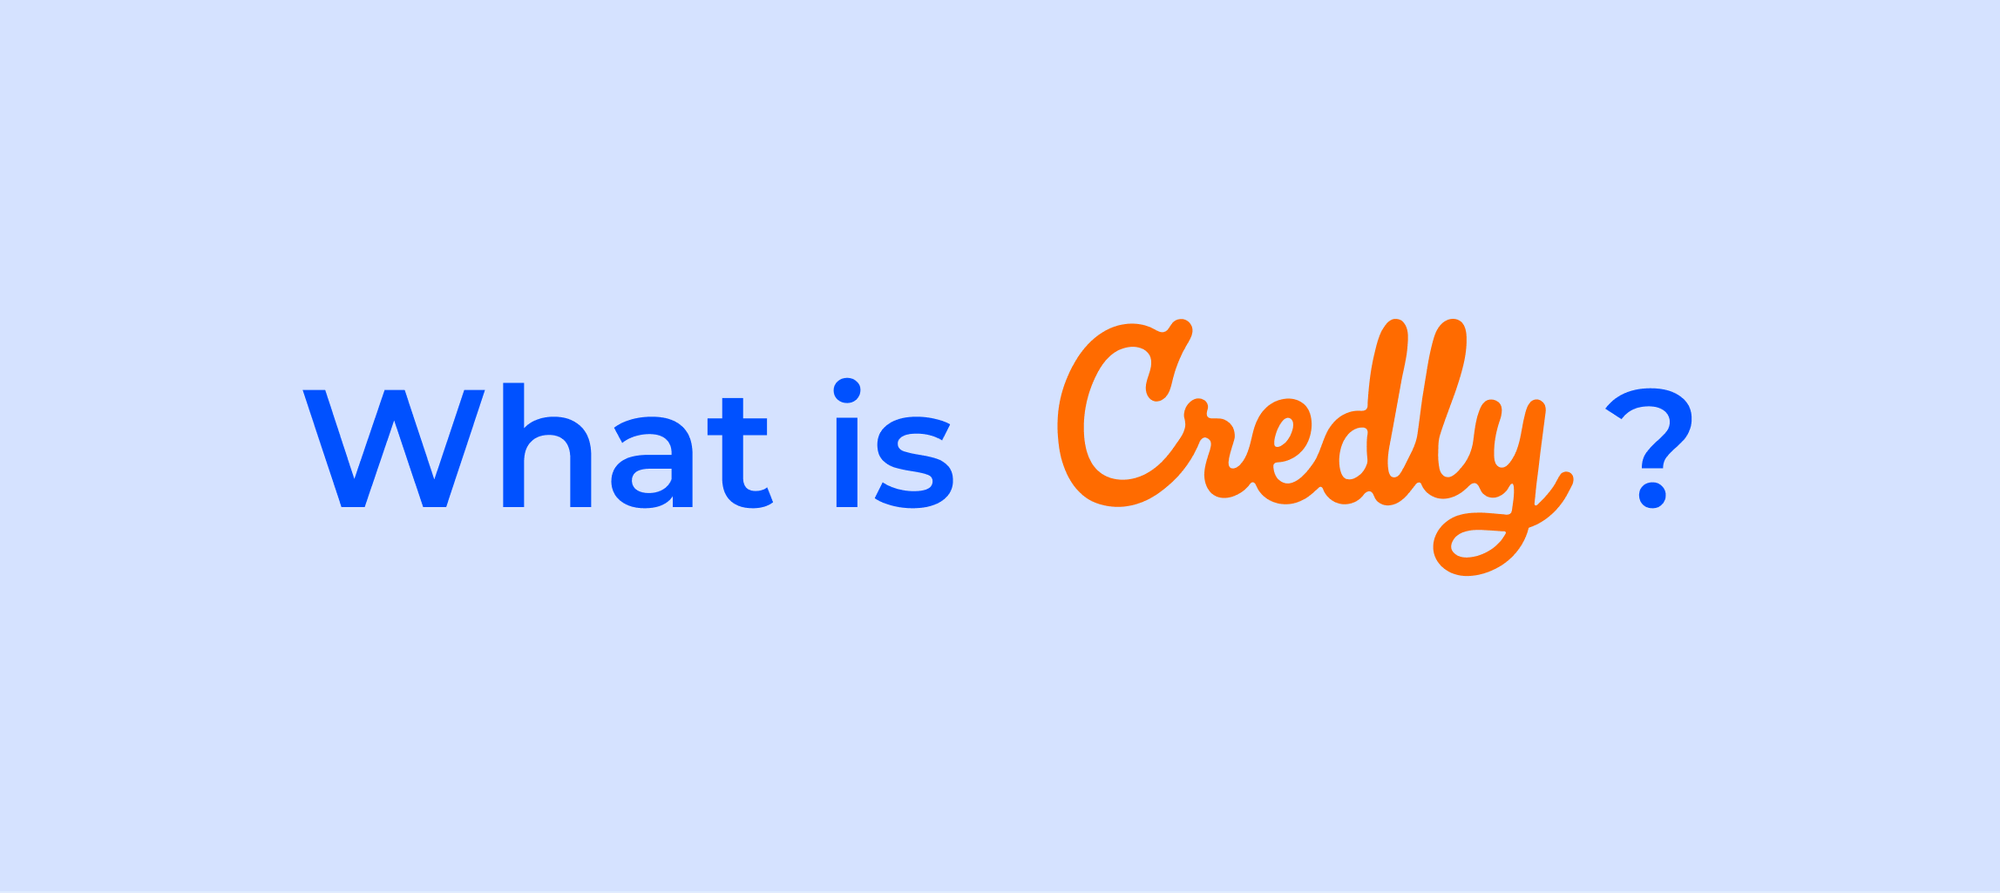 What is Credly and how to use it?